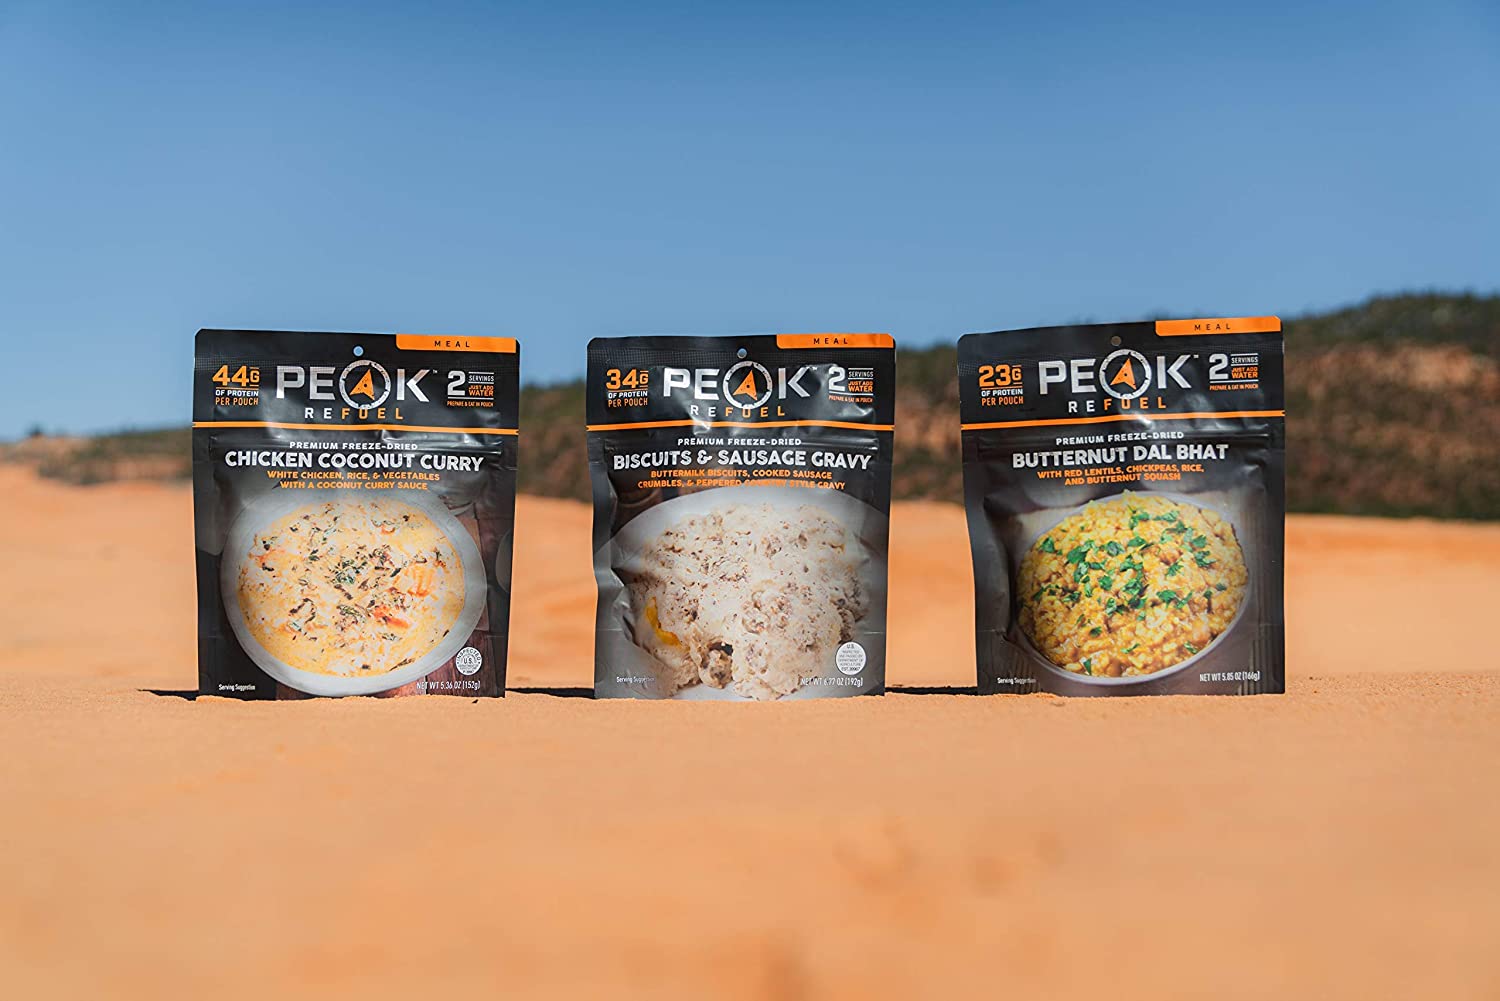 Three packages of Peak Refuel Freeze-Dried Breakfast, Lunch, and Dinner Sampler Food Storage and Backpacking Food Kit - (SHIPS IN 1-2 WEEKS) sitting on top of a sand dune.